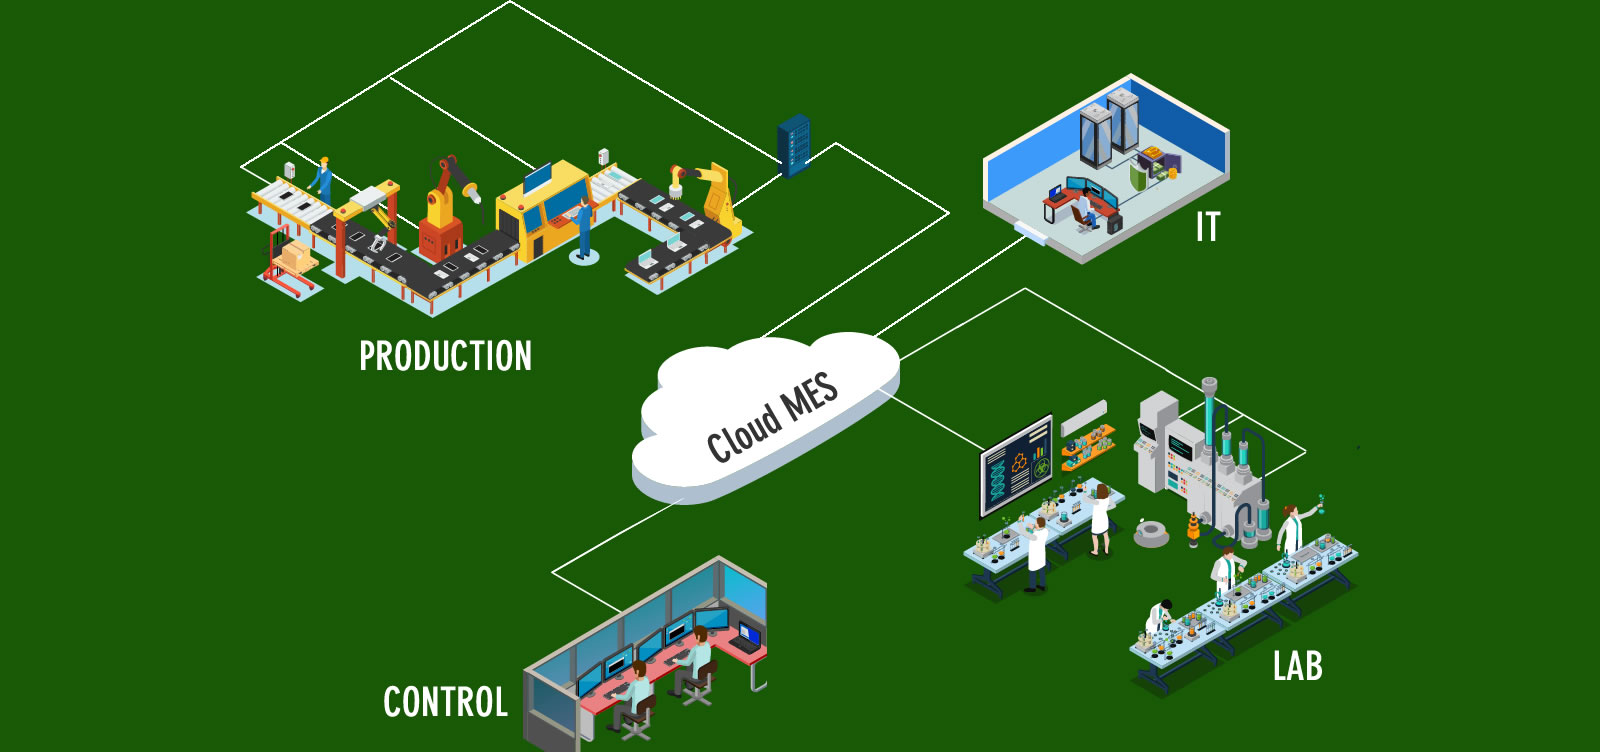 MES and Industrial IoT